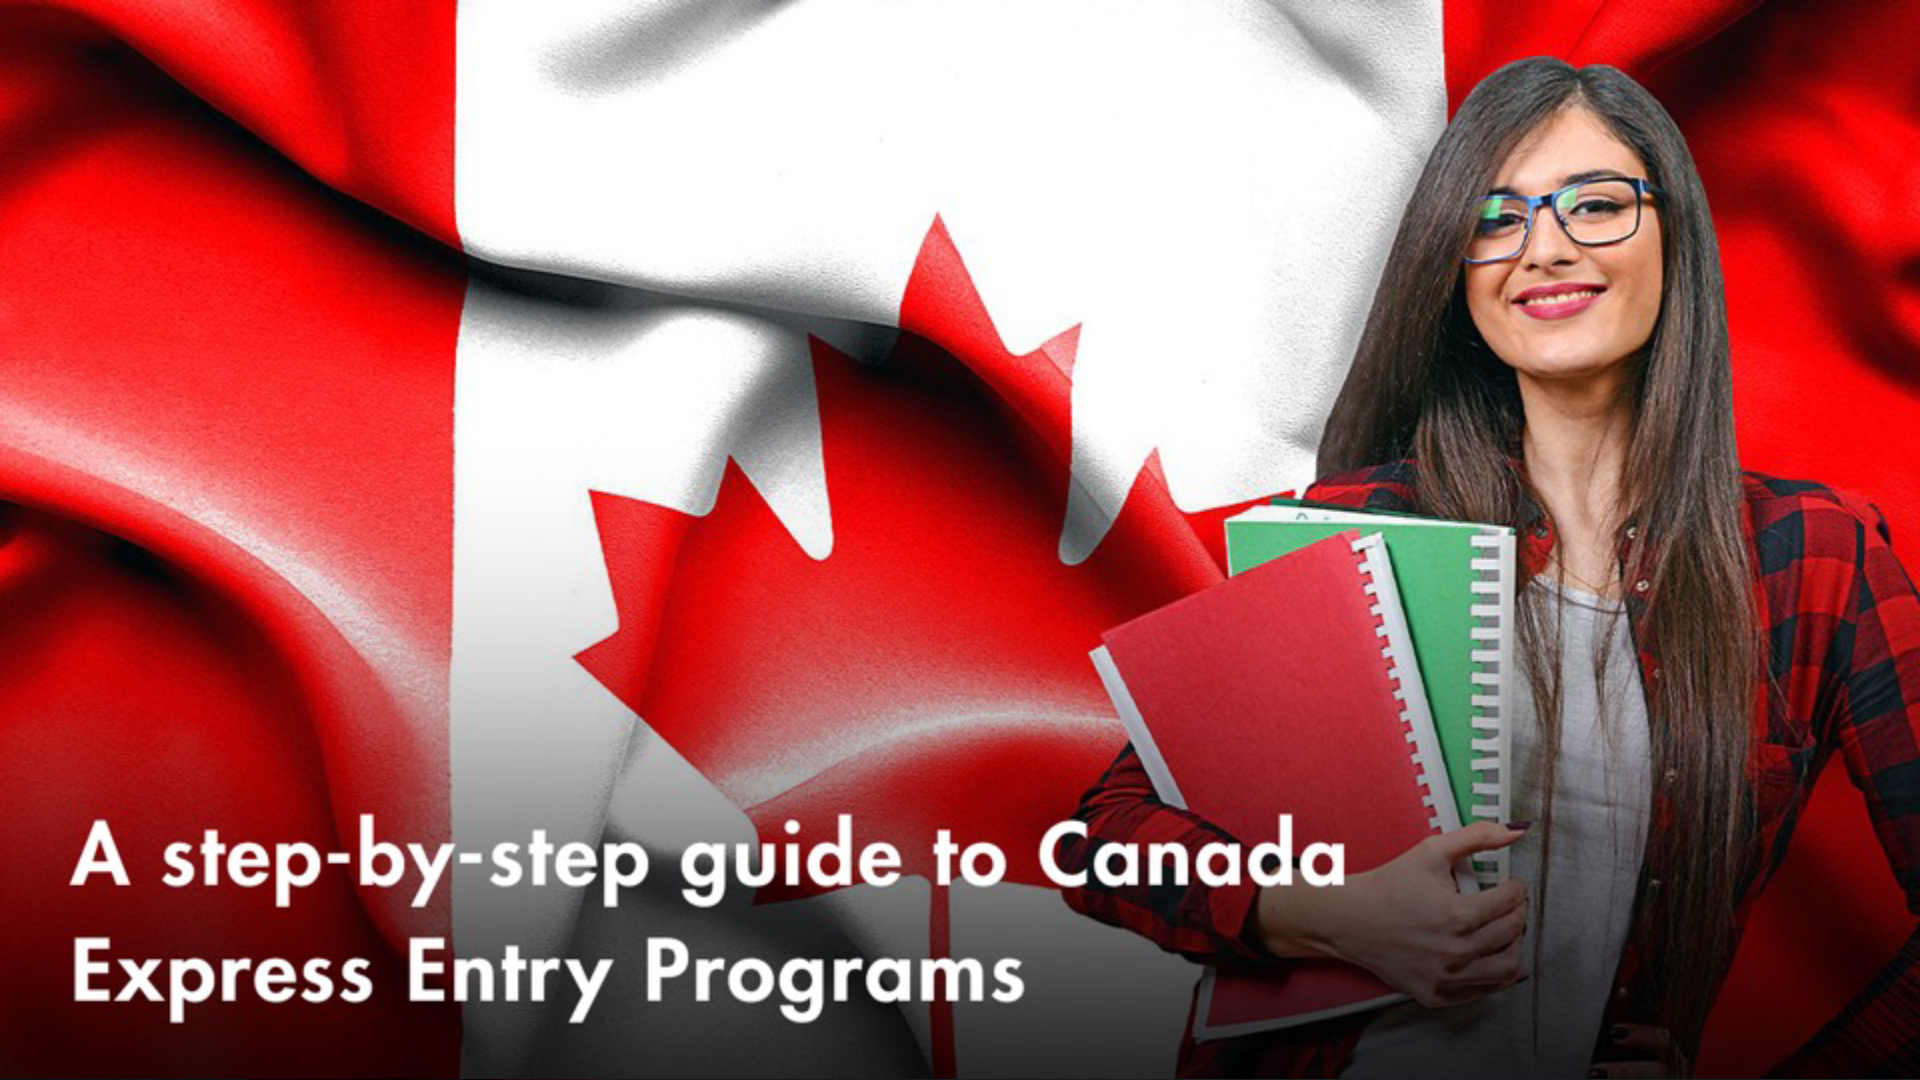 Banner - A step-by-step guide to Canada Express Entry Programs